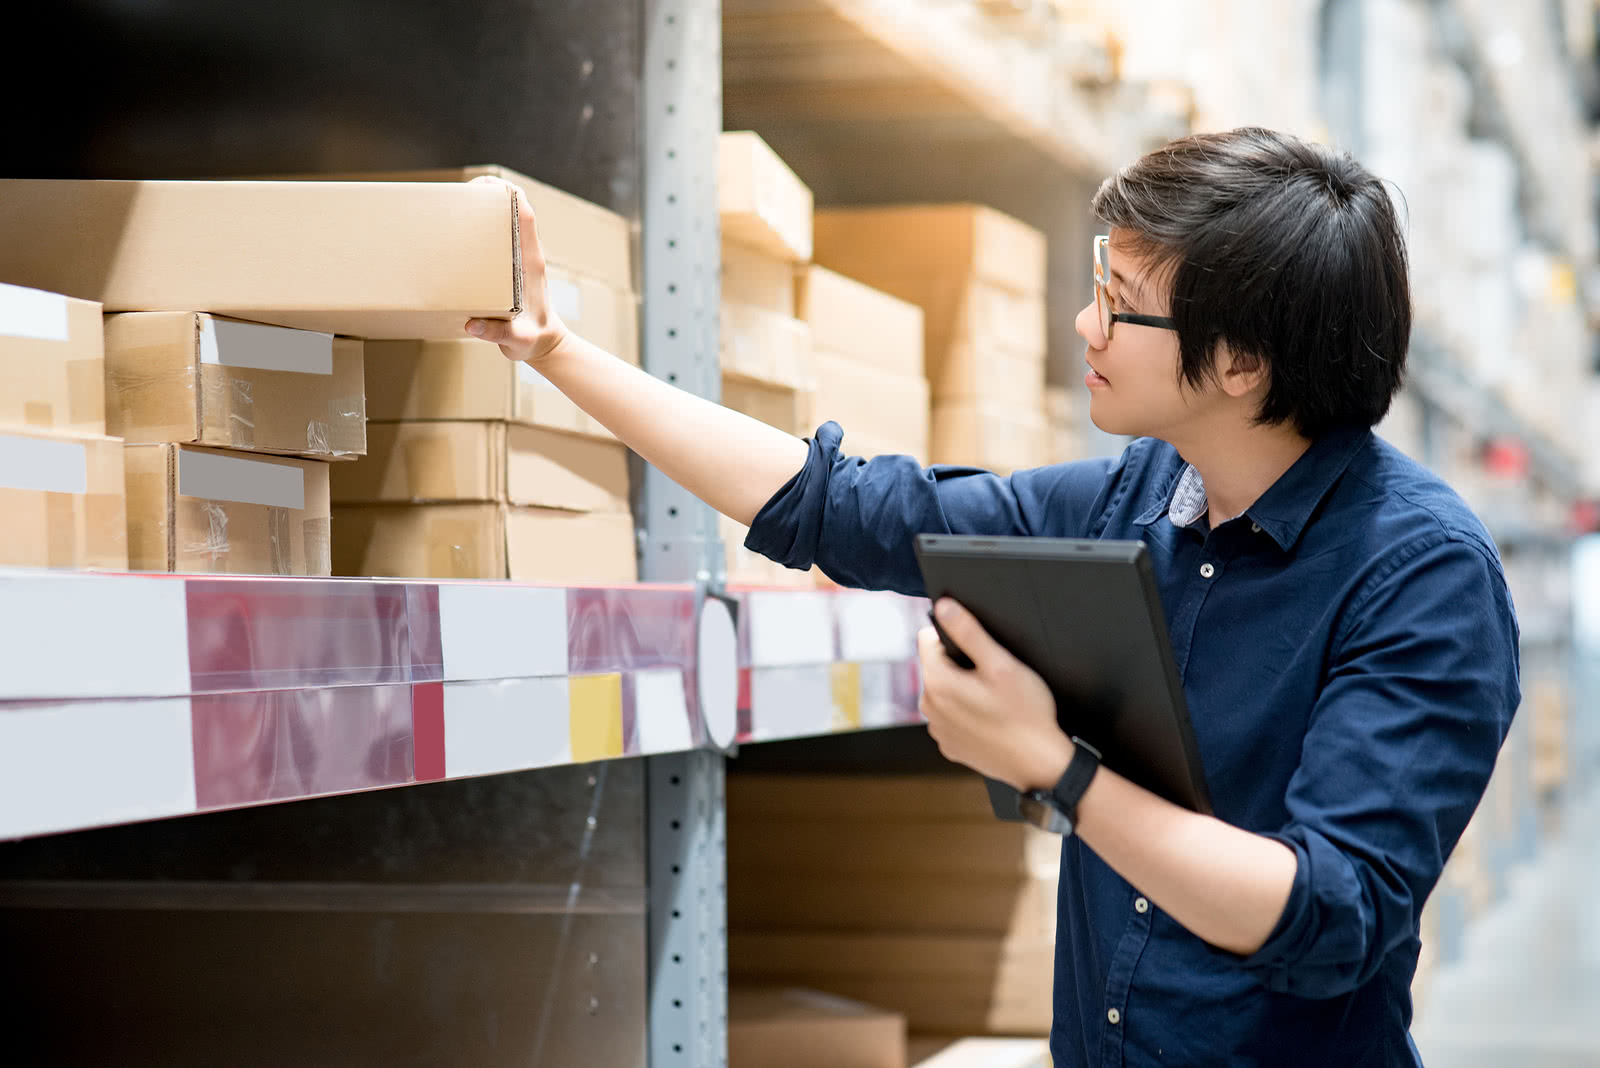 A business owner tracks inventory, a key part of inventory management for small business